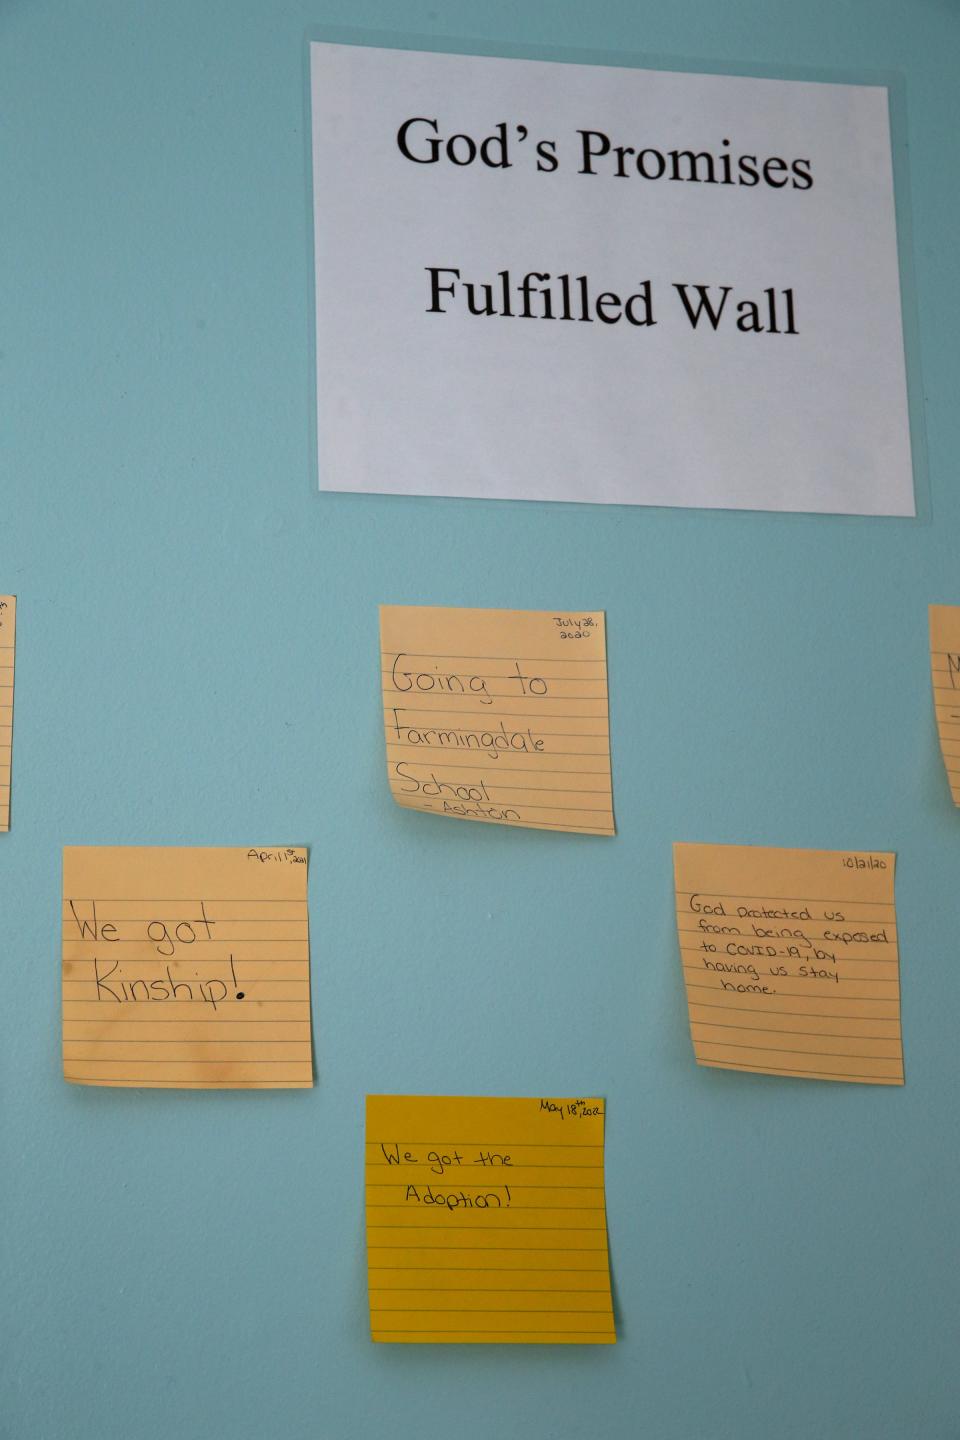 Post Its are shown under the "God's Promises Fulfilled Wall" at Chale Ashley and her newly adopted son Ashton Ashley's Farmingdale home Wednesday, May 26, 2022.  She was interviewed about the challenges of kinship adoption of Ashton who used to be her nephew.